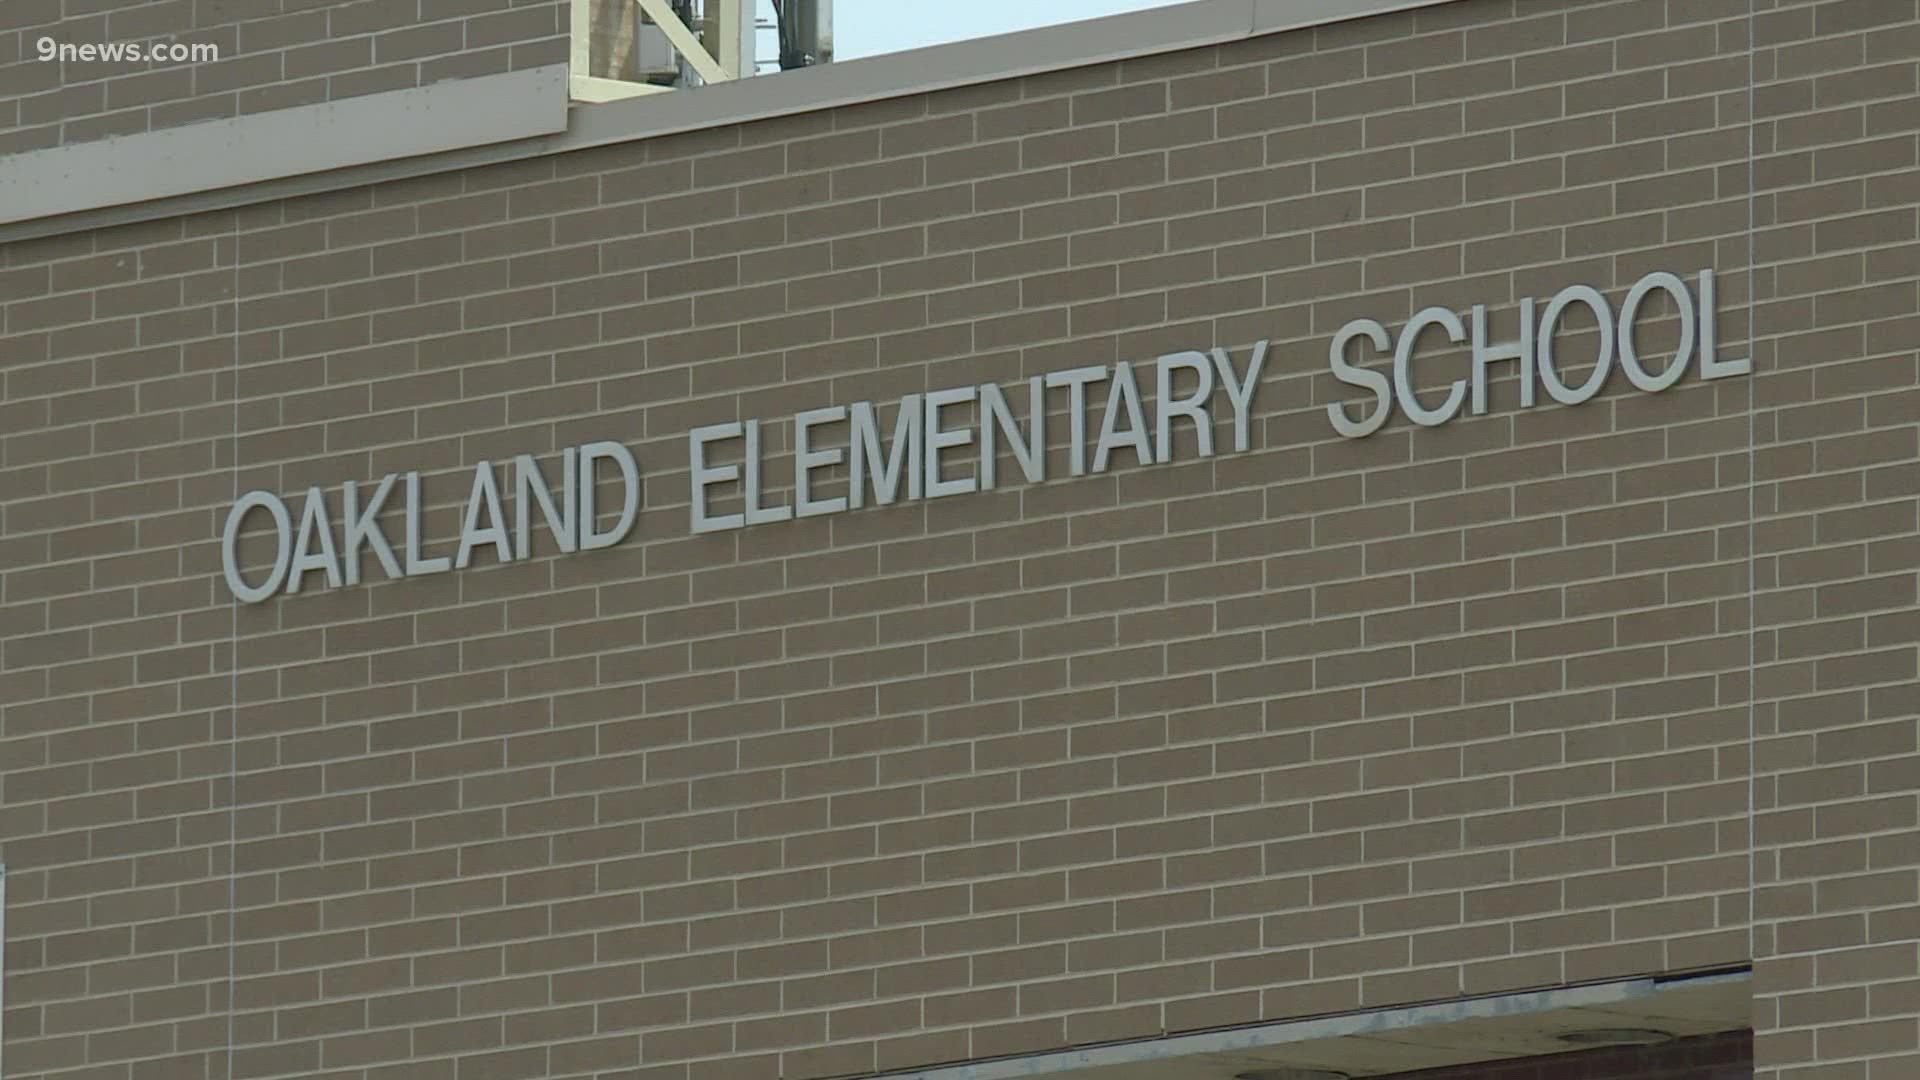 Four COVID-19 cases are now linked to a Denver elementary school forced to close in-person learning this week.